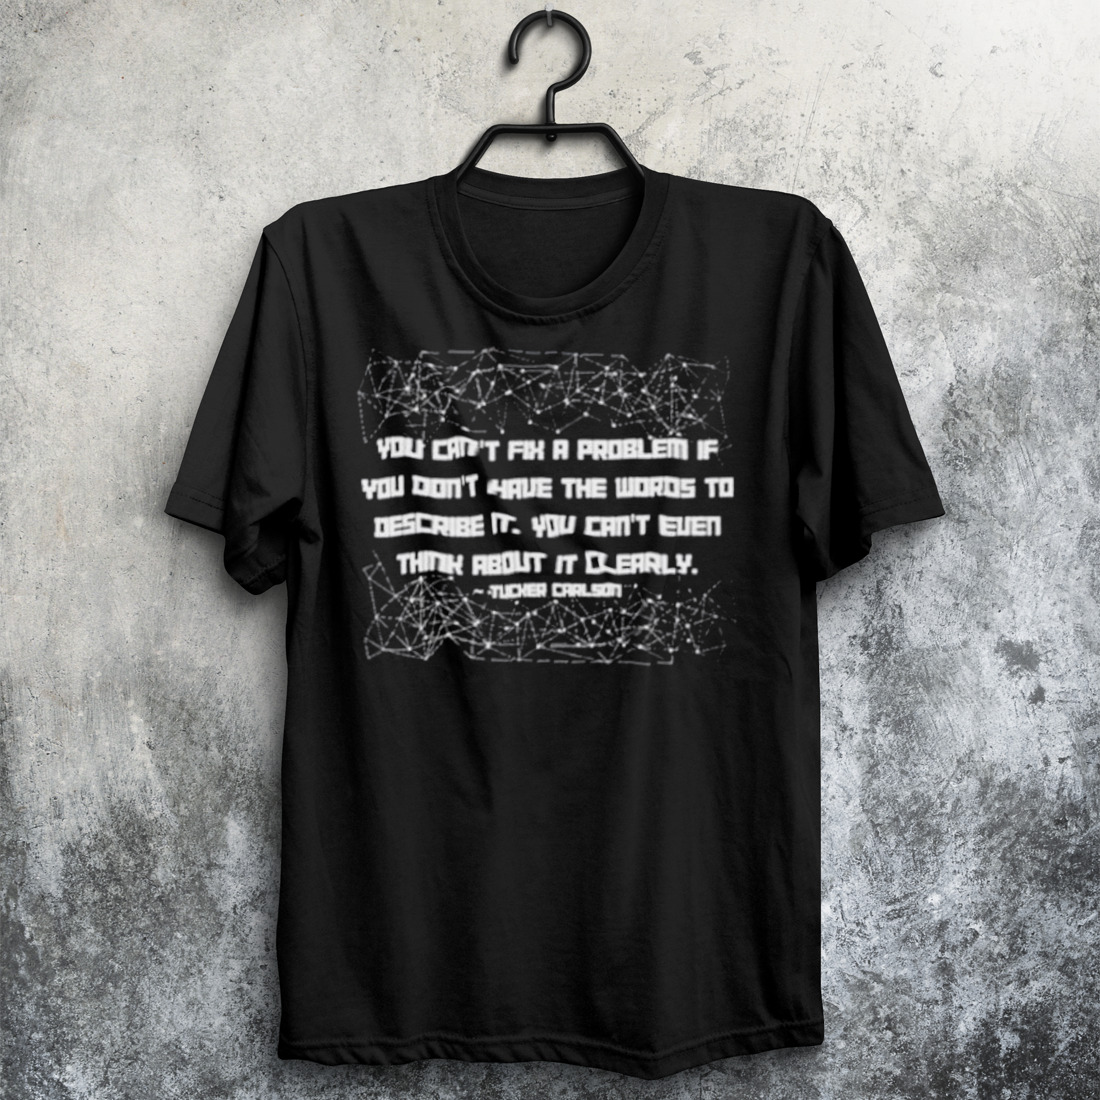 You can’t fix a problem if you don’t have the words to describe it shirt